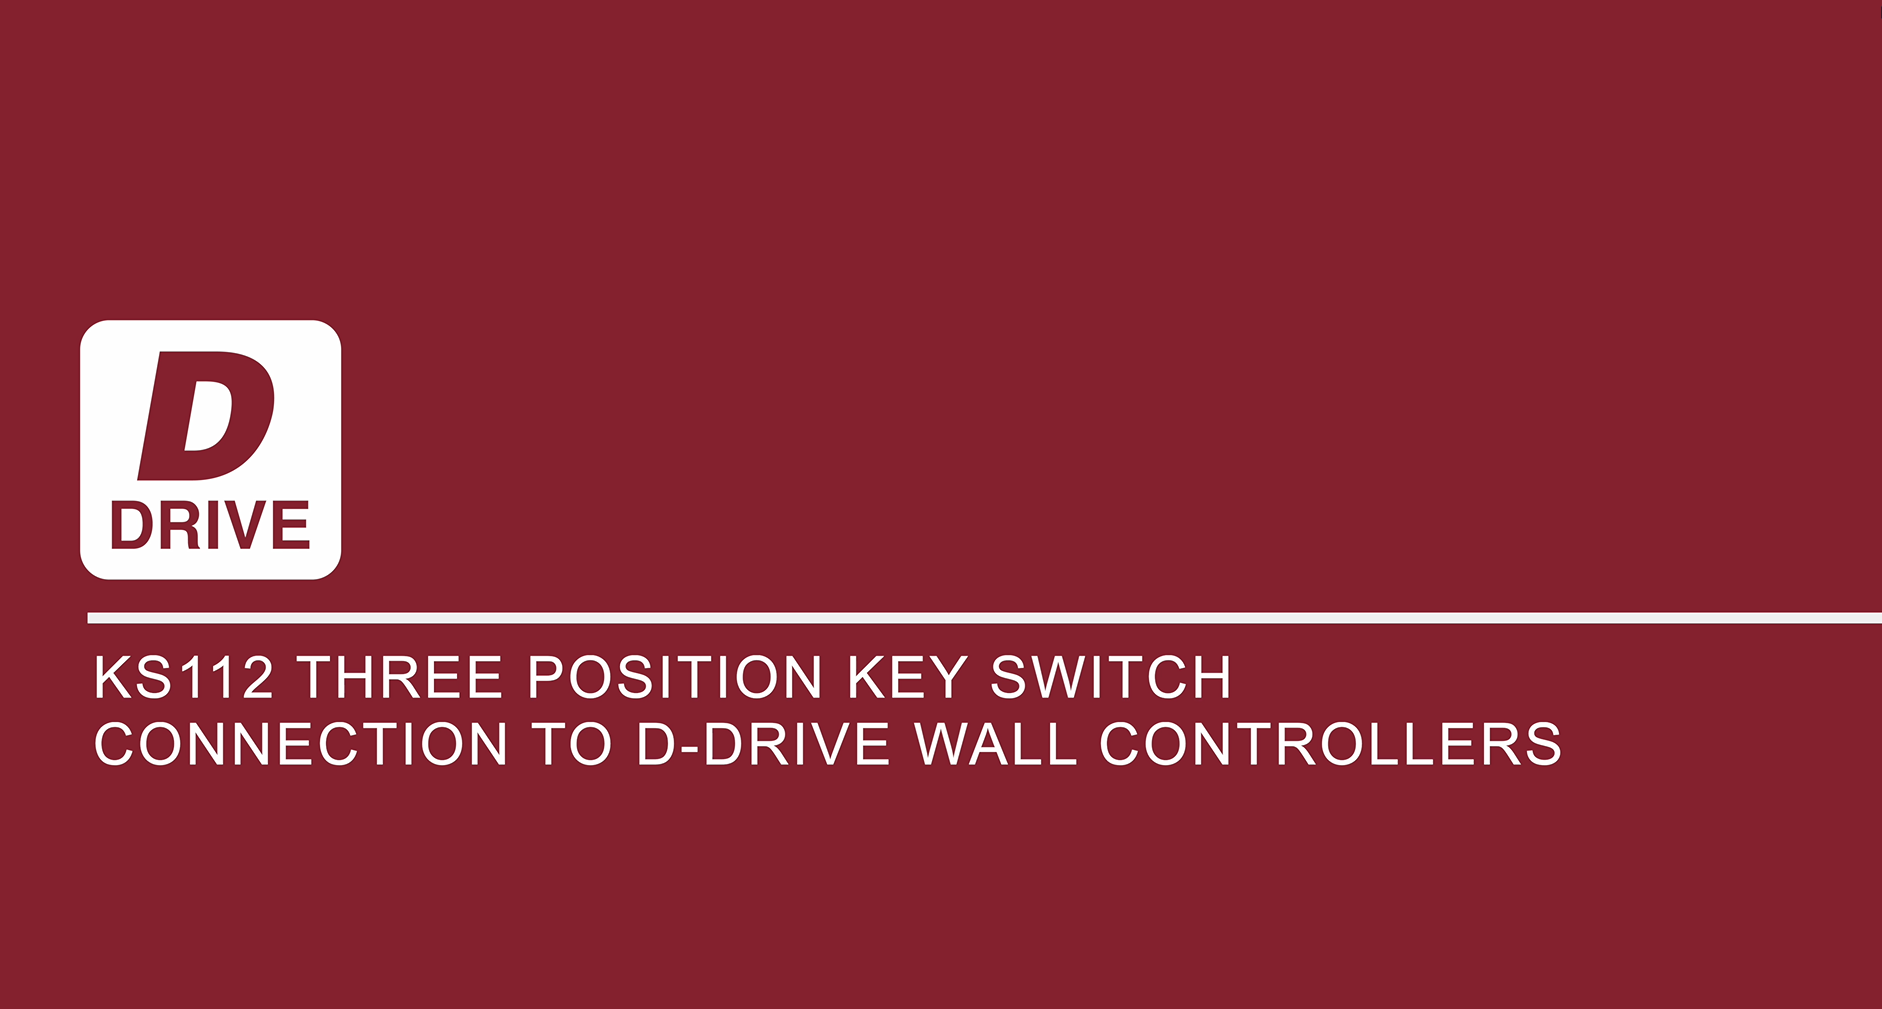 KS112 three position key switch connection to D-Drive wall controllers